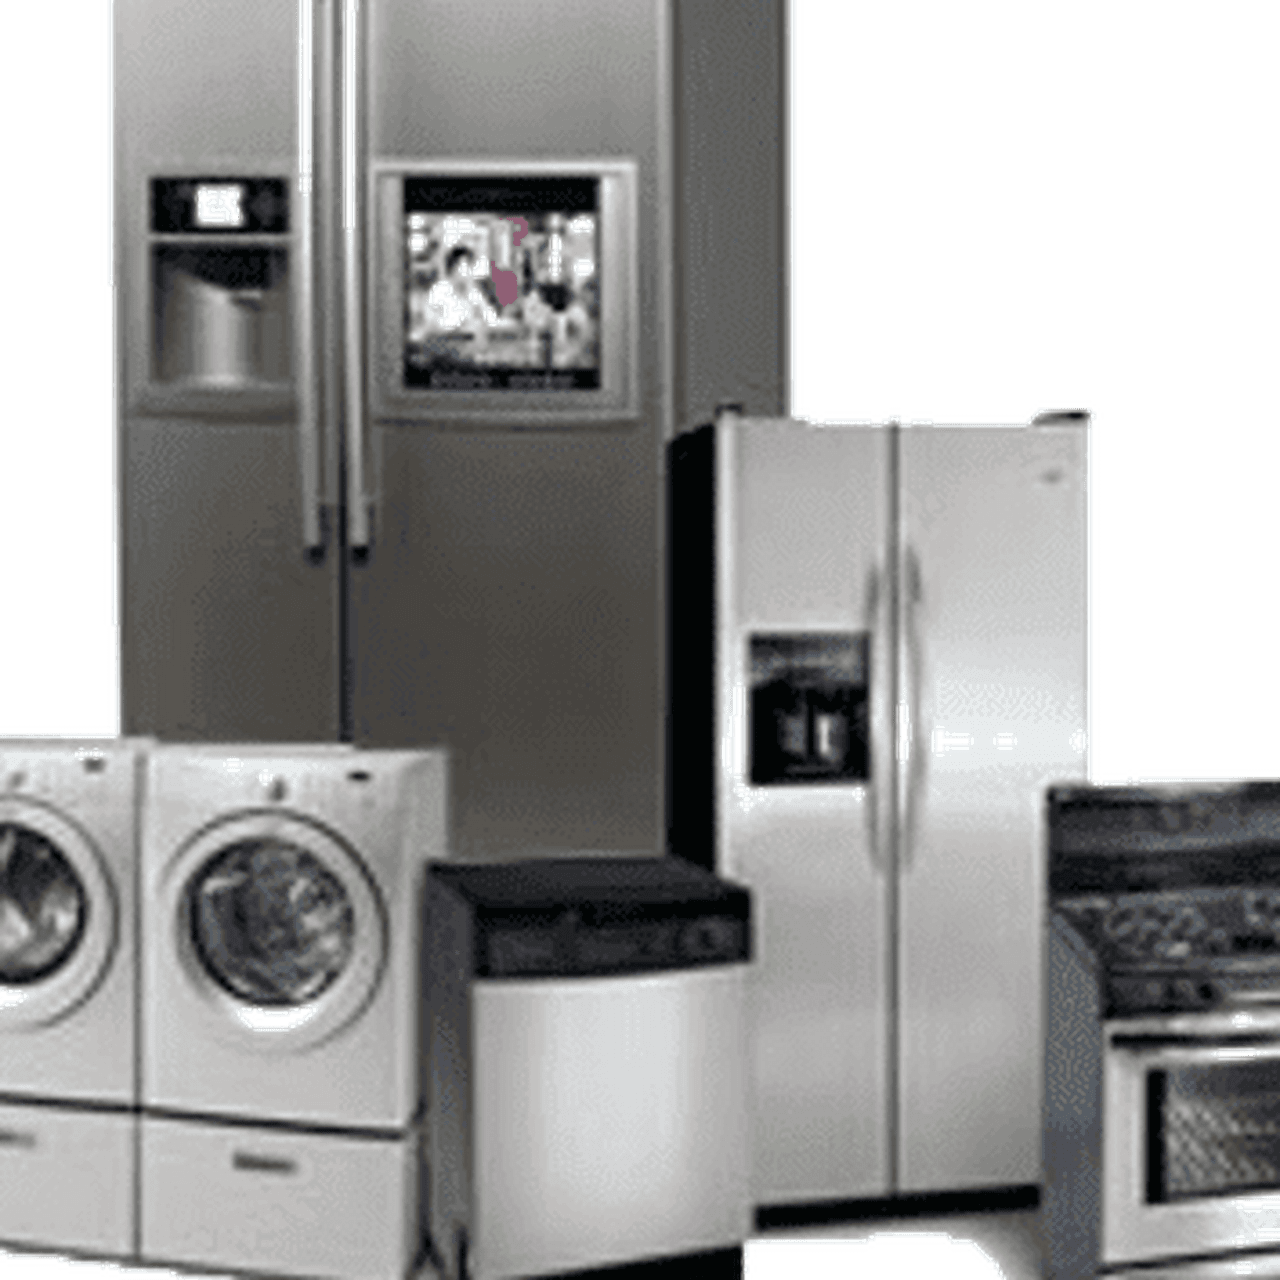 Major Appliance Repair Service by Licensed, Insured, and Bonded Professionals